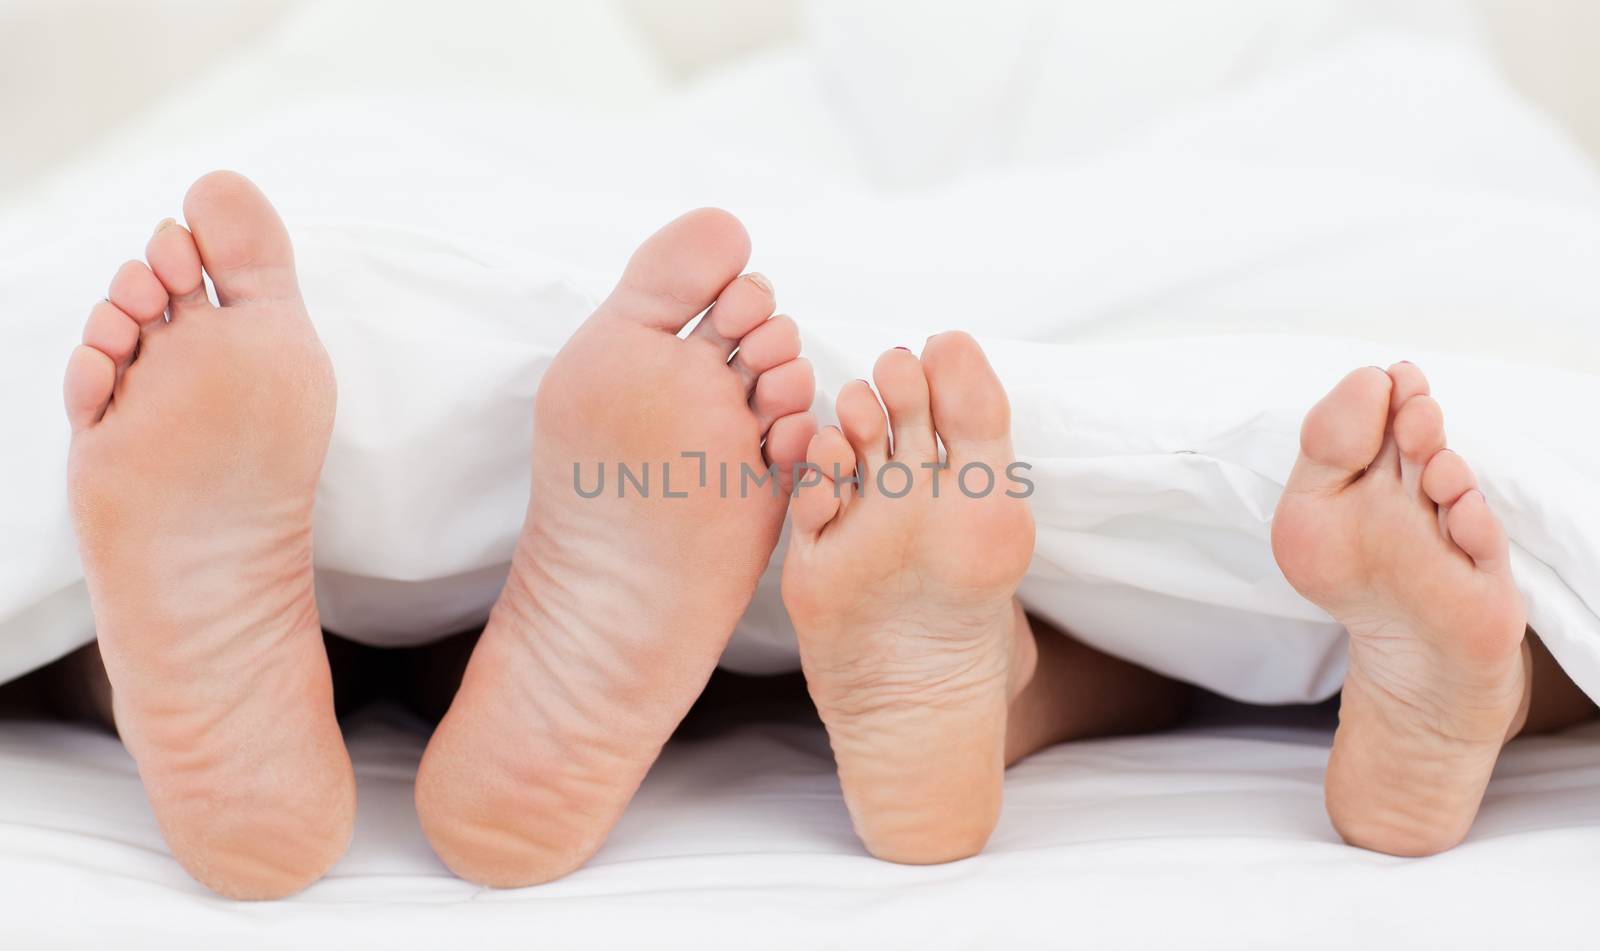 Two members of a family showing their feet while lying on a bed by Wavebreakmedia